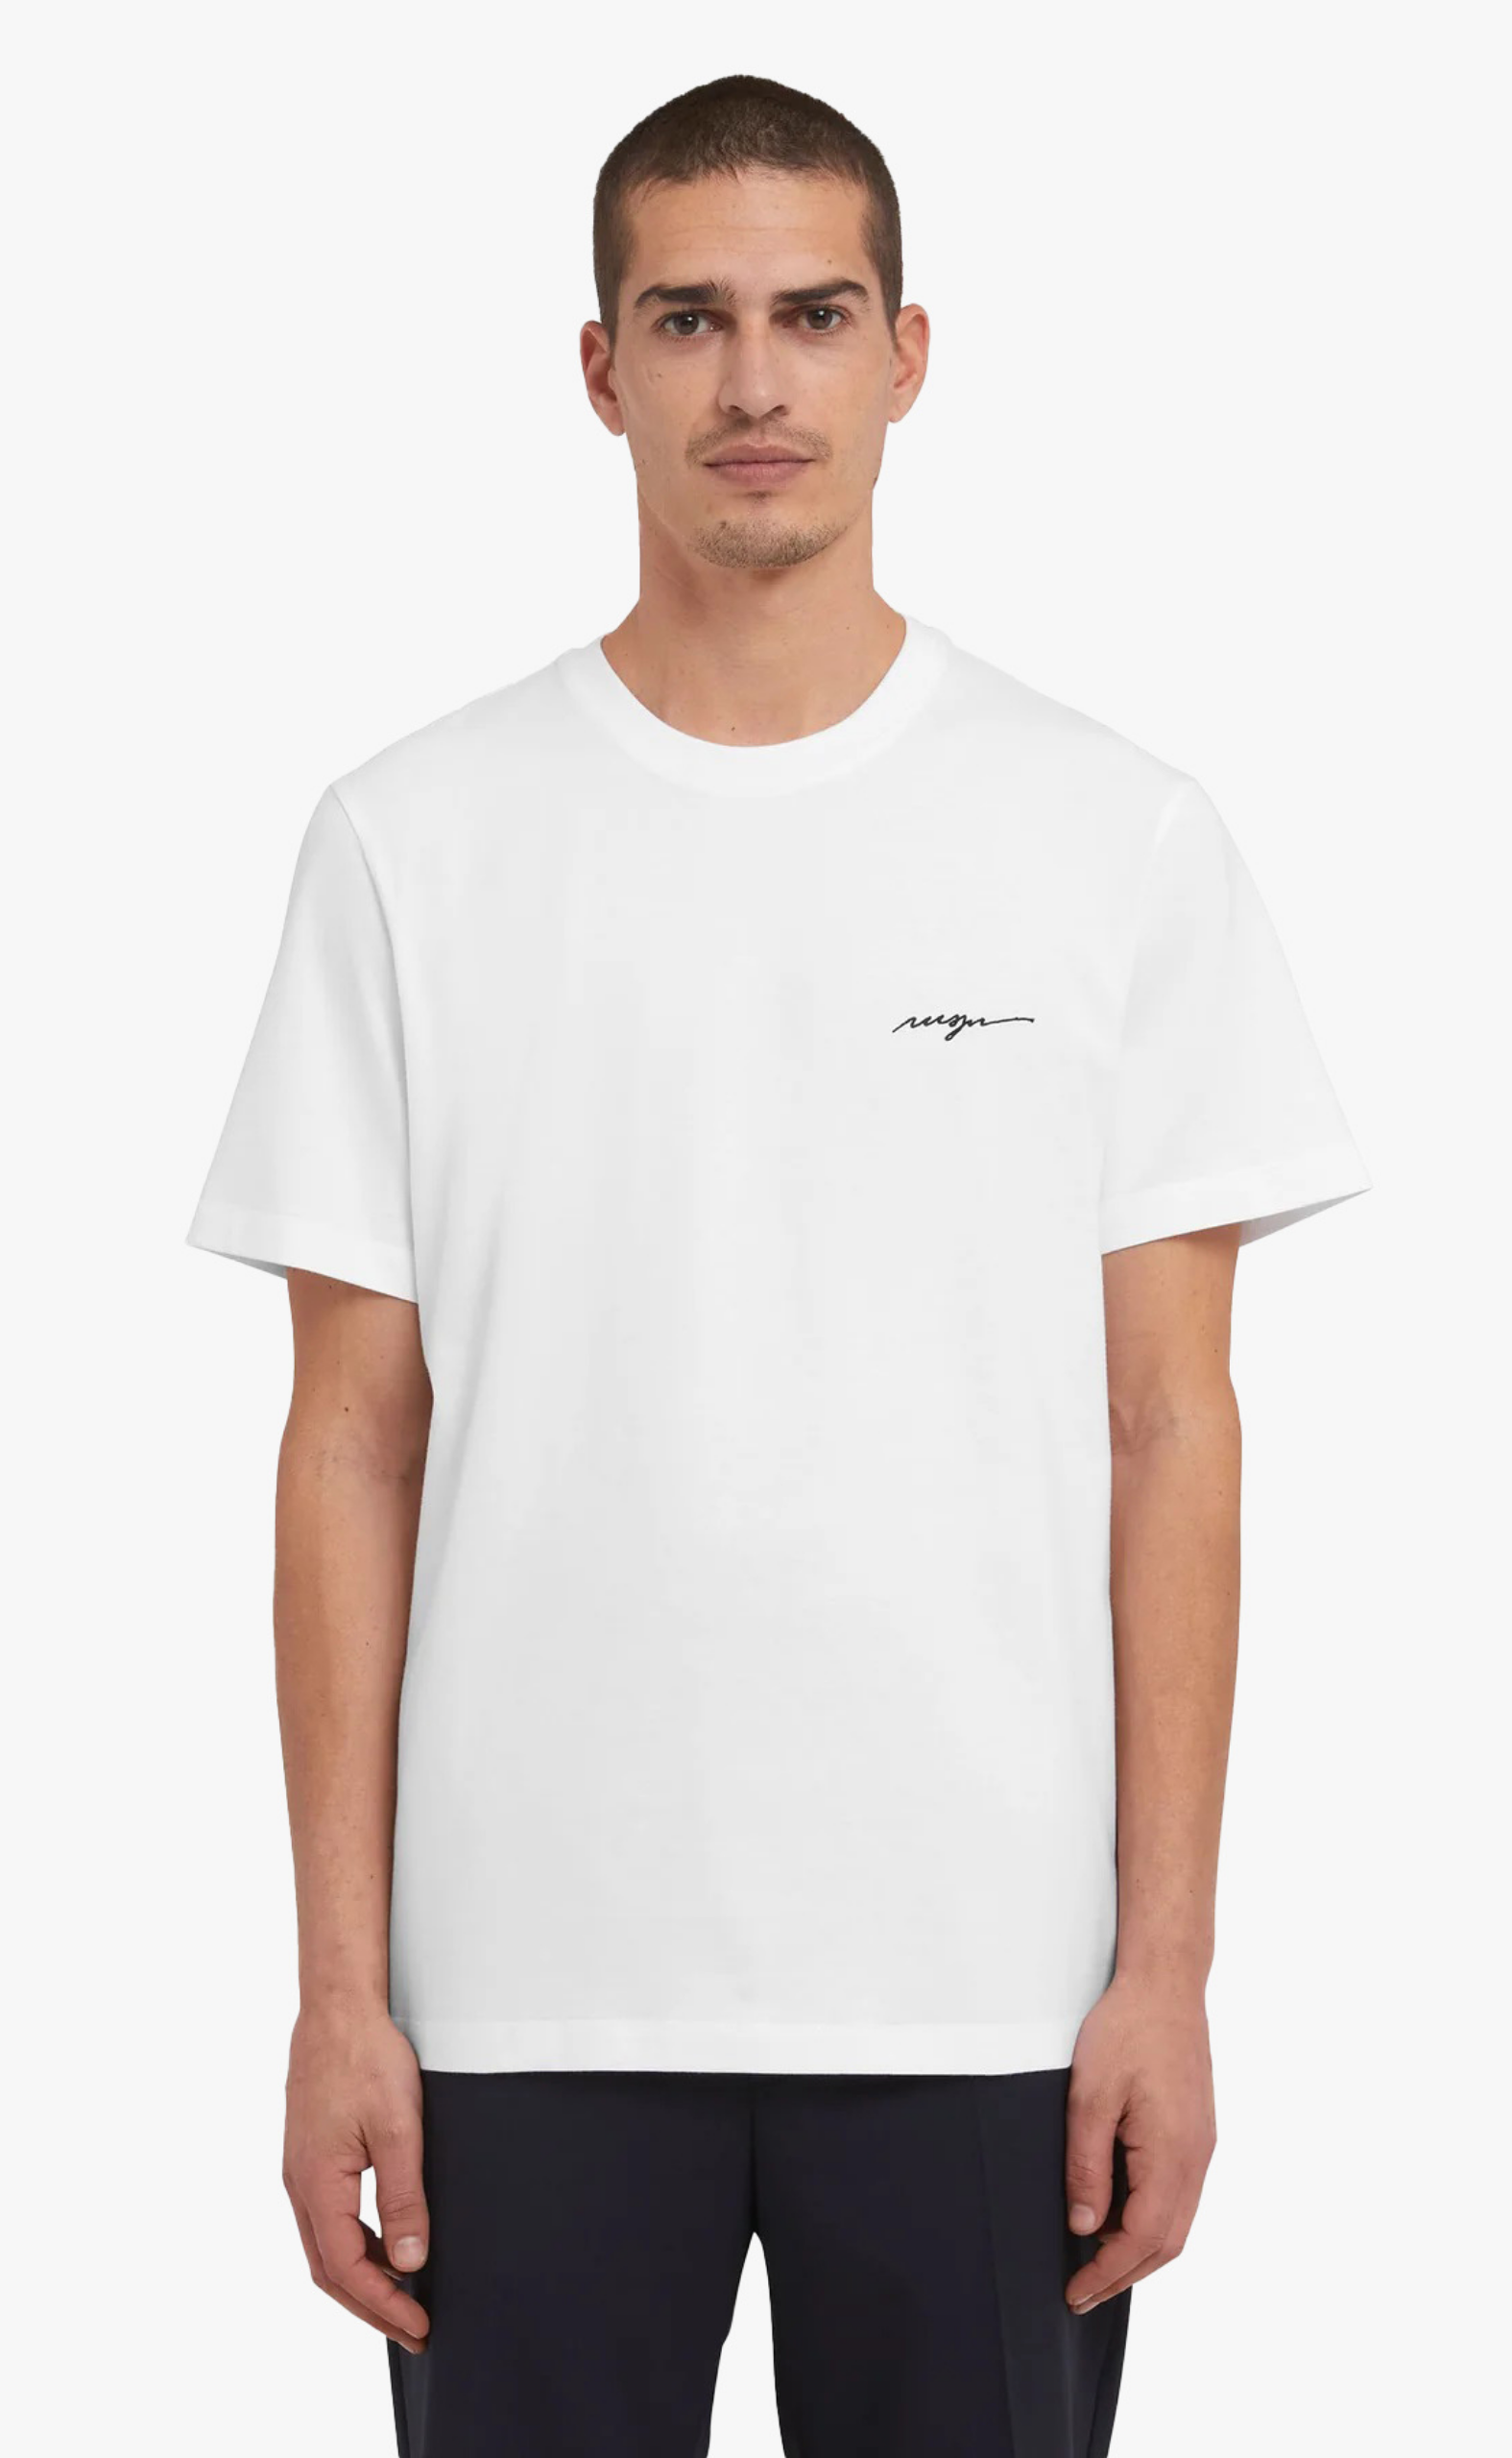  EMBROIDERED CURSIVE LOGO OFF WHITE T-SHIRT